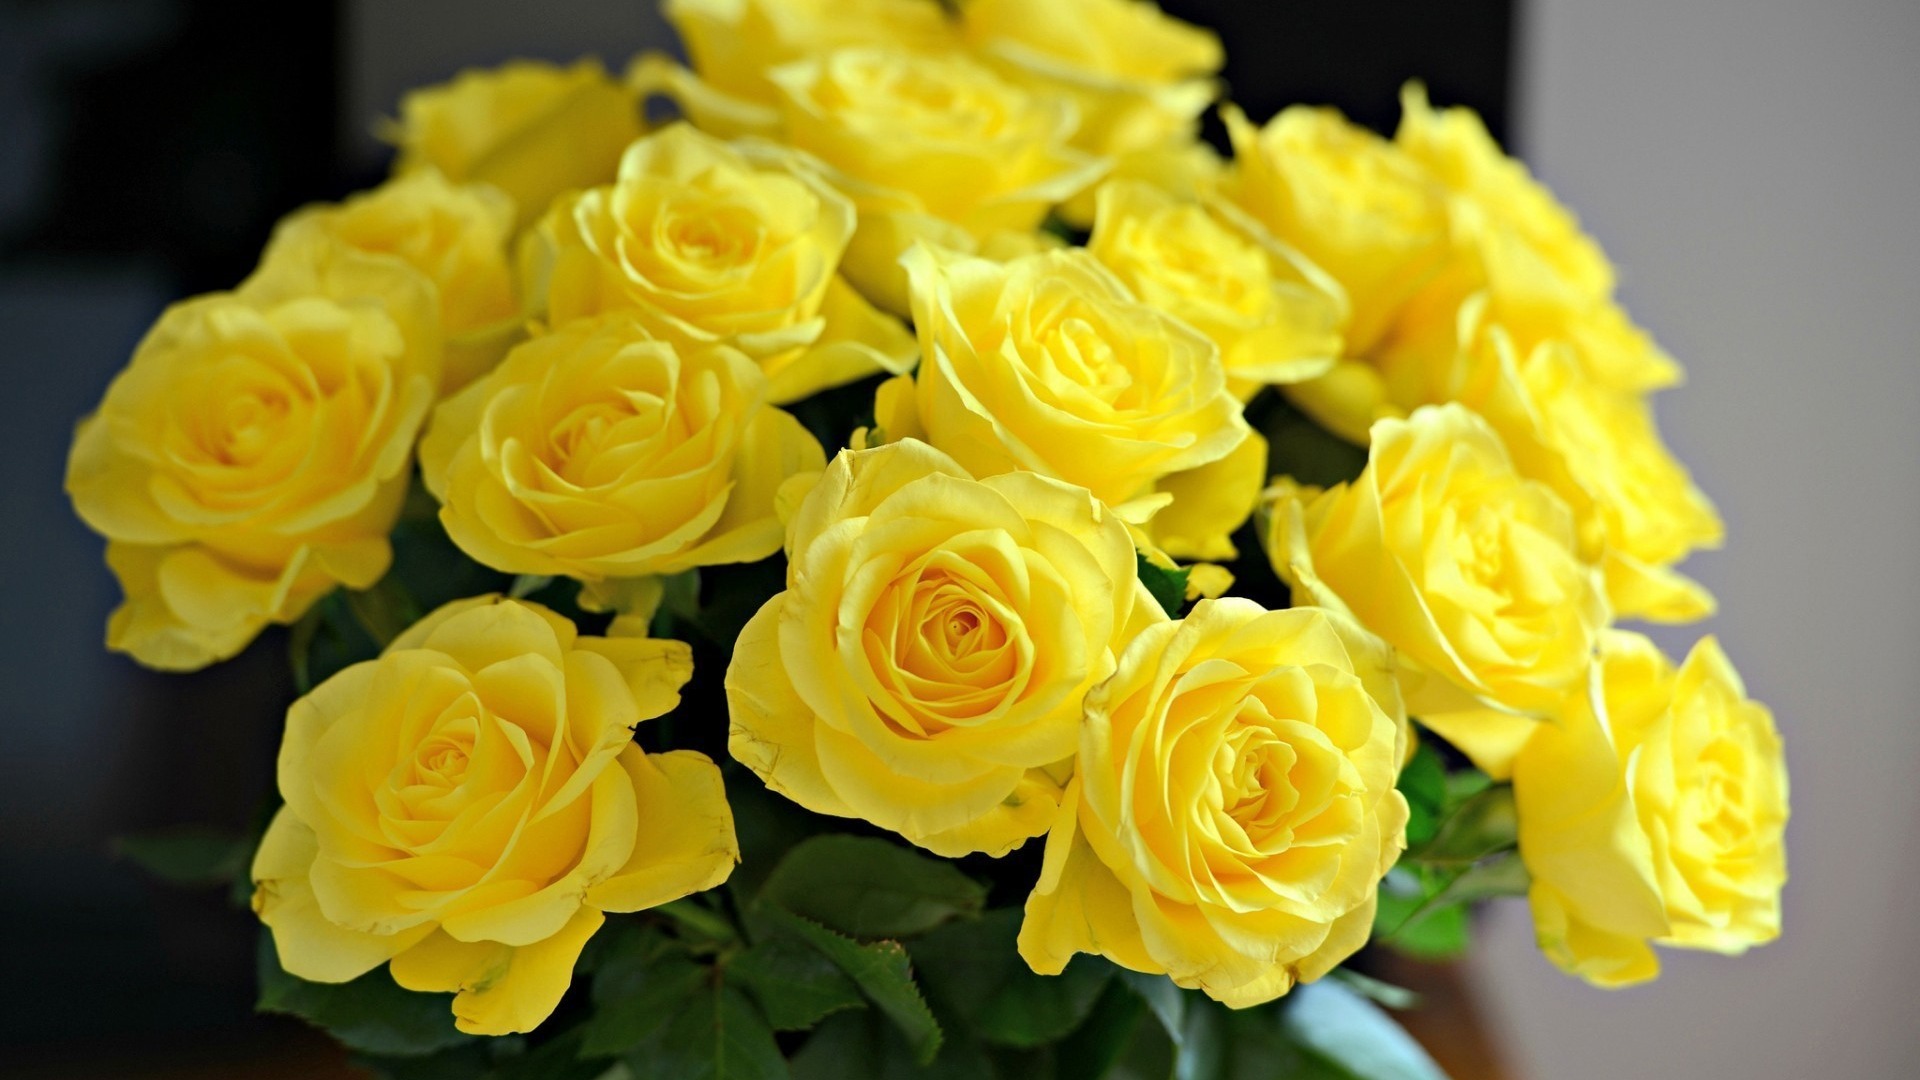 Wallpapers bouquet roses yellow on the desktop